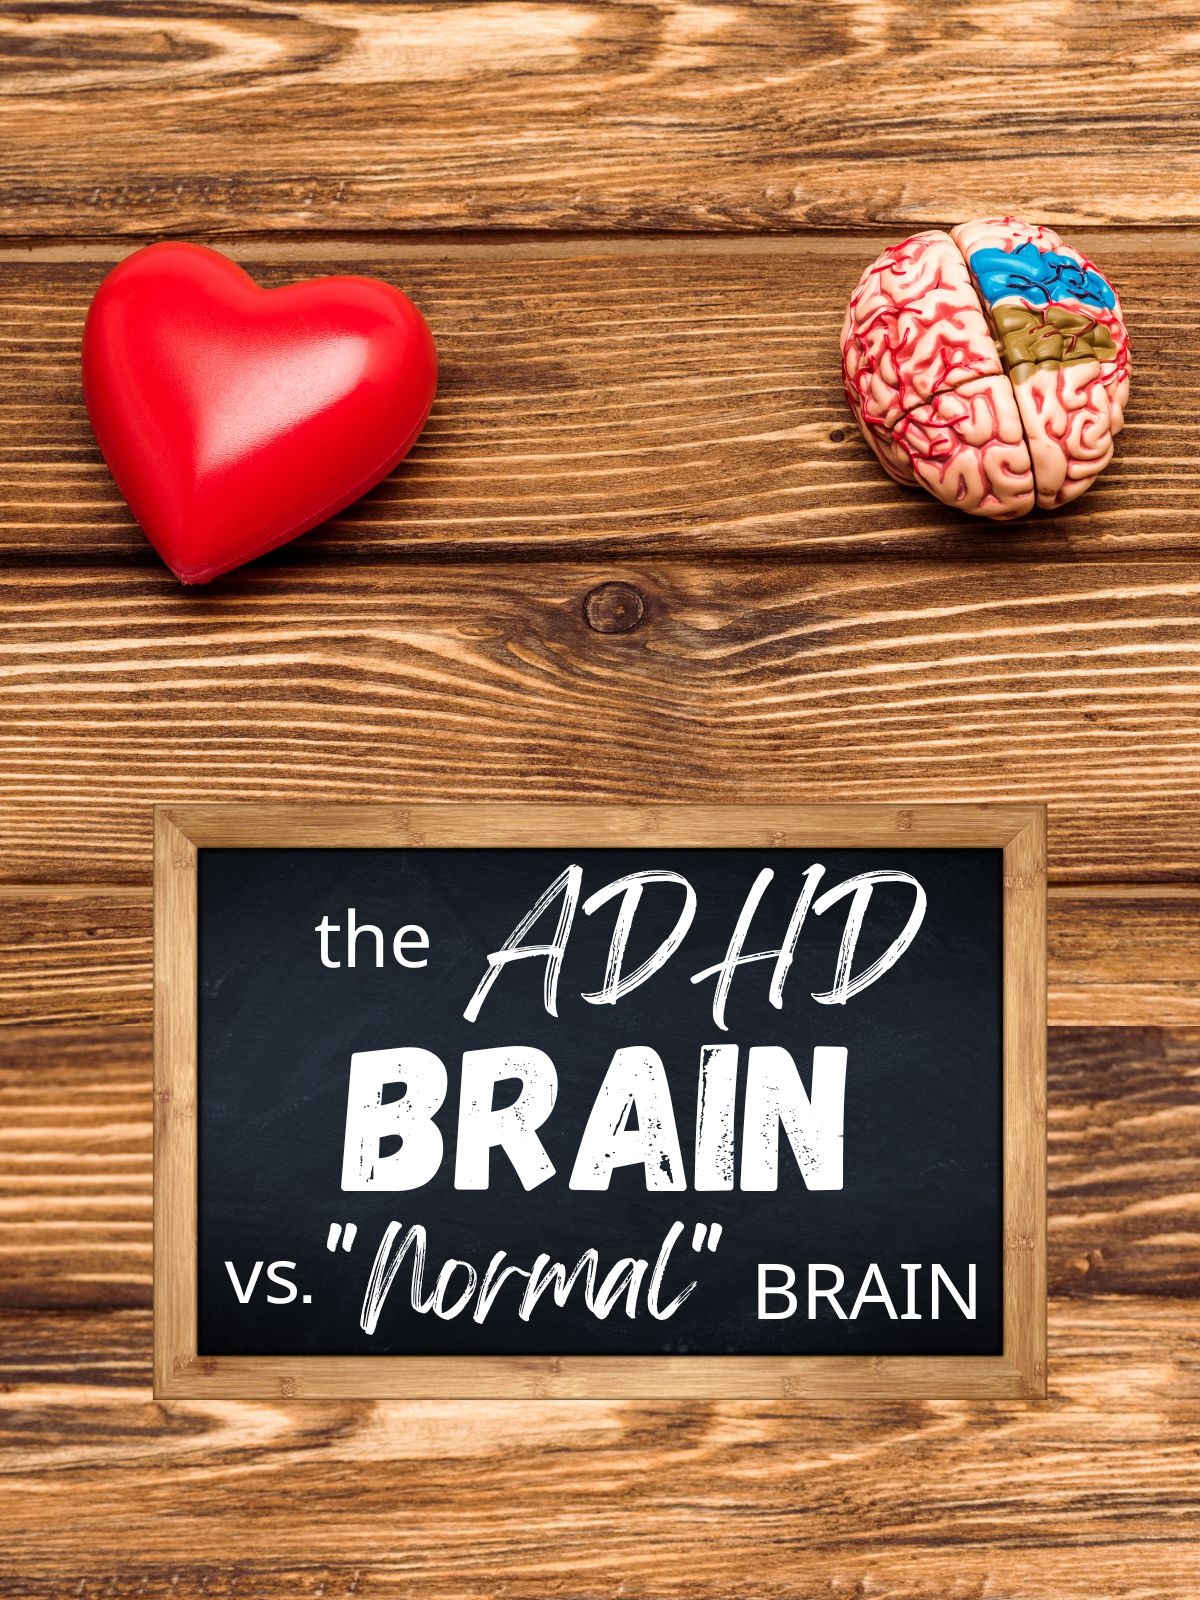 A picture of an adhd brain and a red heart with the text "the ADHD brain vs. "normal brain."